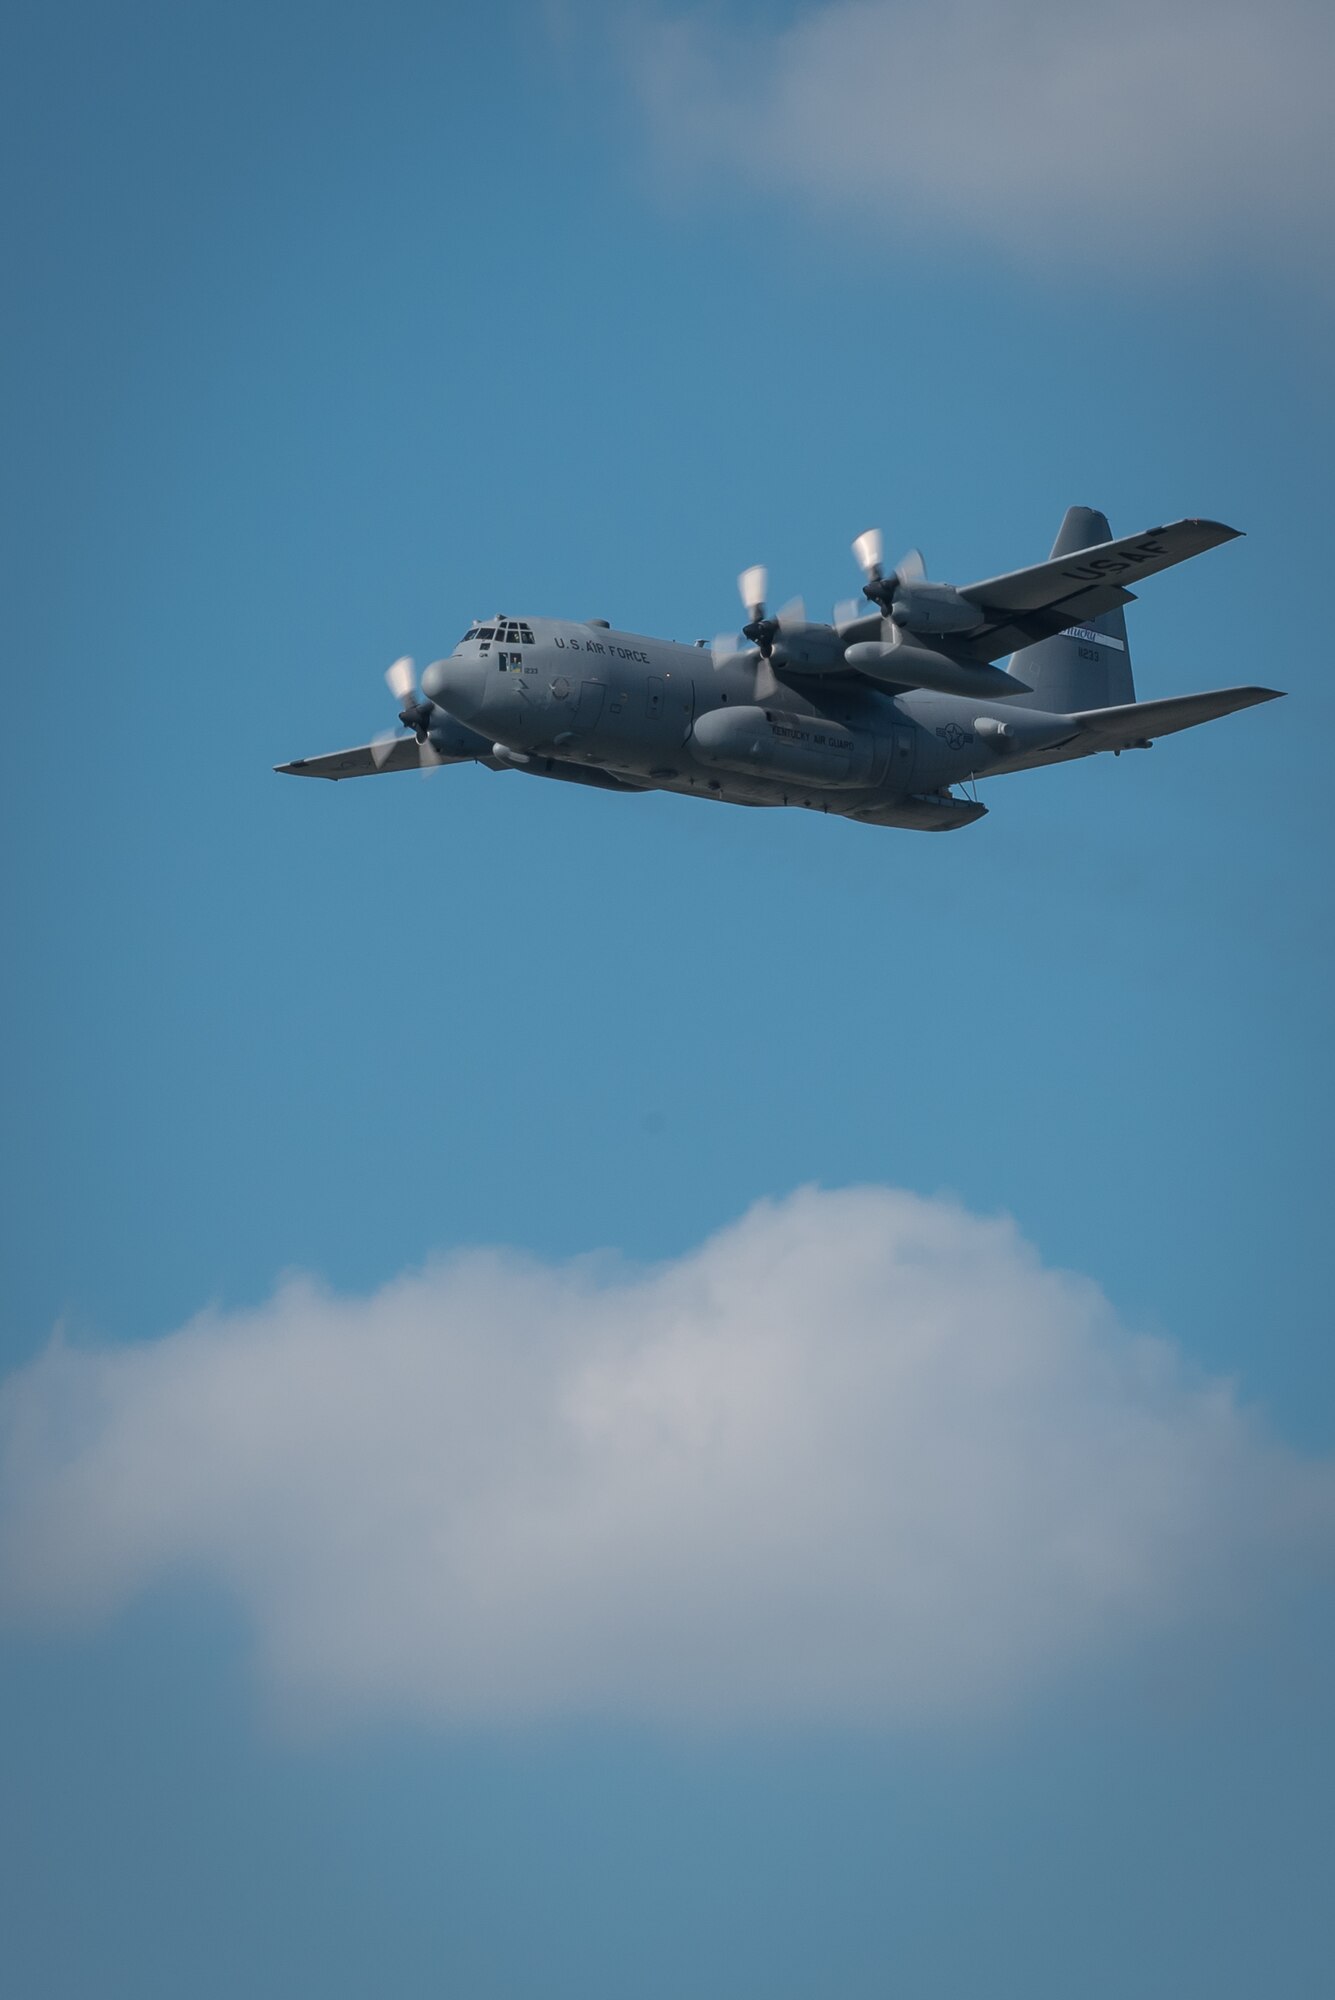 A Kentucky Air National Guard C-130 Hercules transport approaches the show box during the Thunder Over Louisville air show in downtown Louisville, Ky., in 2016. The aircraft will serve as a jump platform for members of the Kentucky Air Guard's 123rd Special Tactics Squadron during the 2018 air show, scheduled for April 21. The special operators will parachute into the Ohio River as part of a demonstration on insertion techniques.